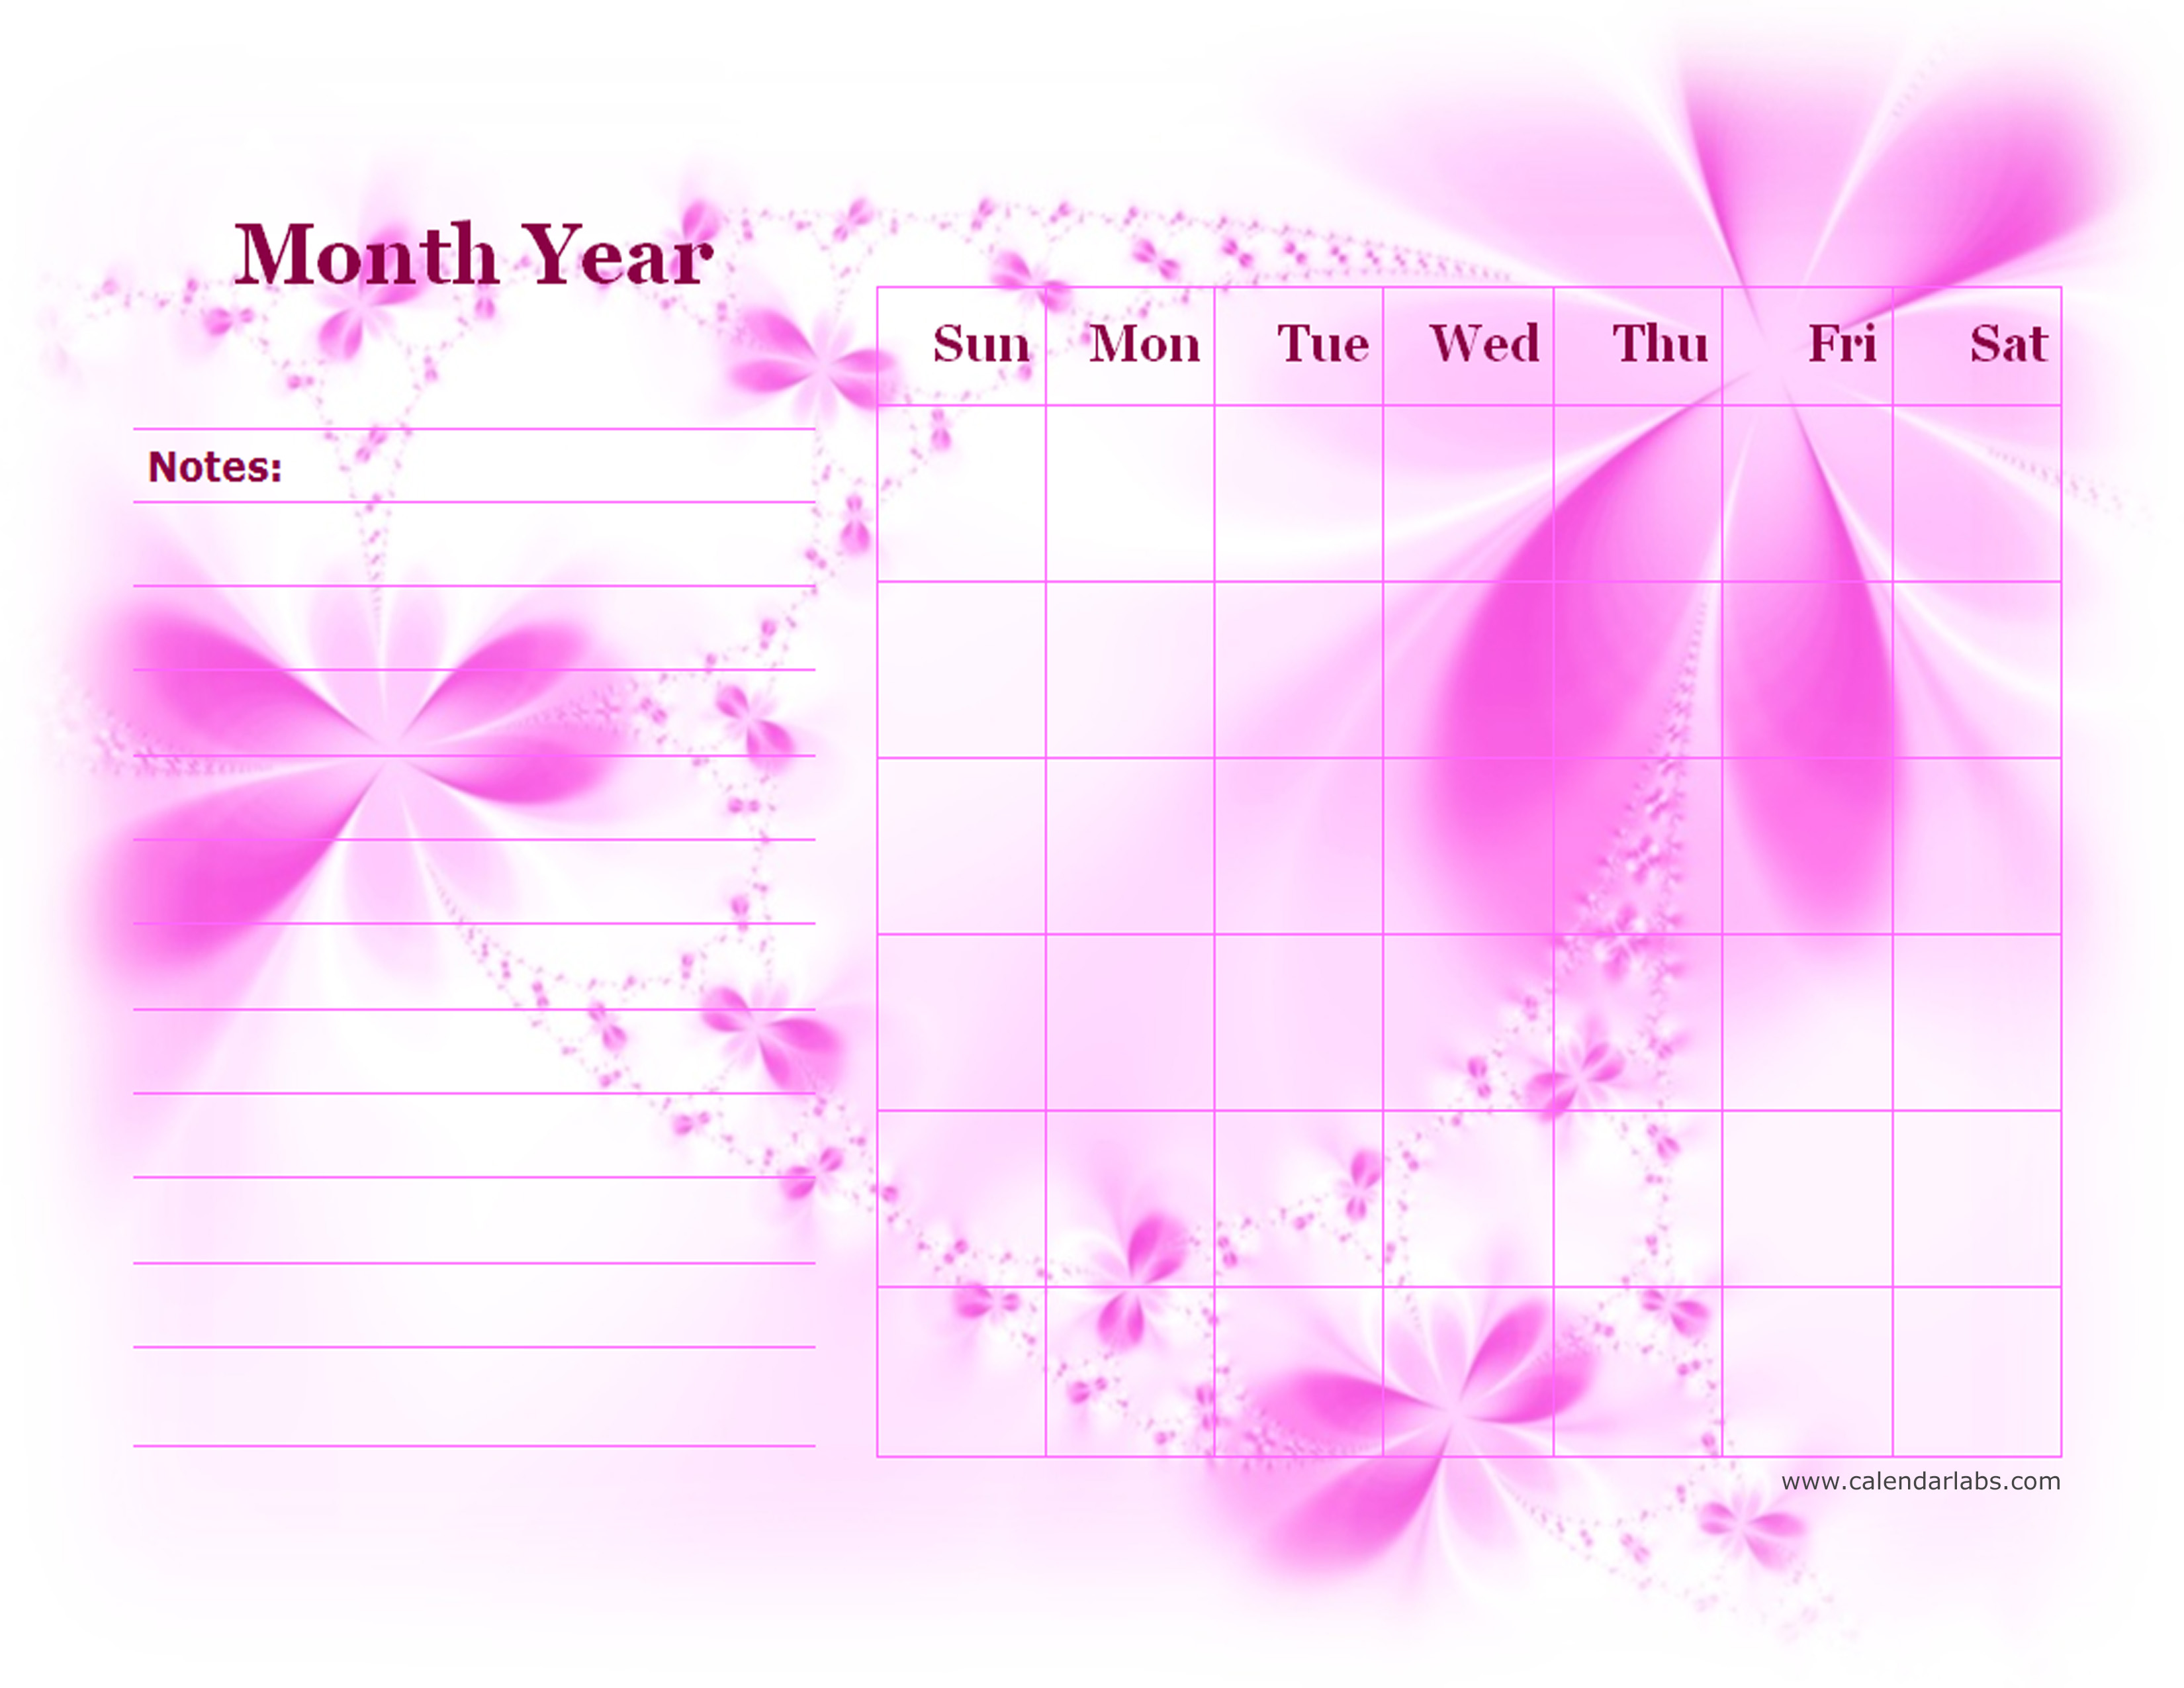 Monthly Blank Calendar in Purple Shade - Free Printable Templates